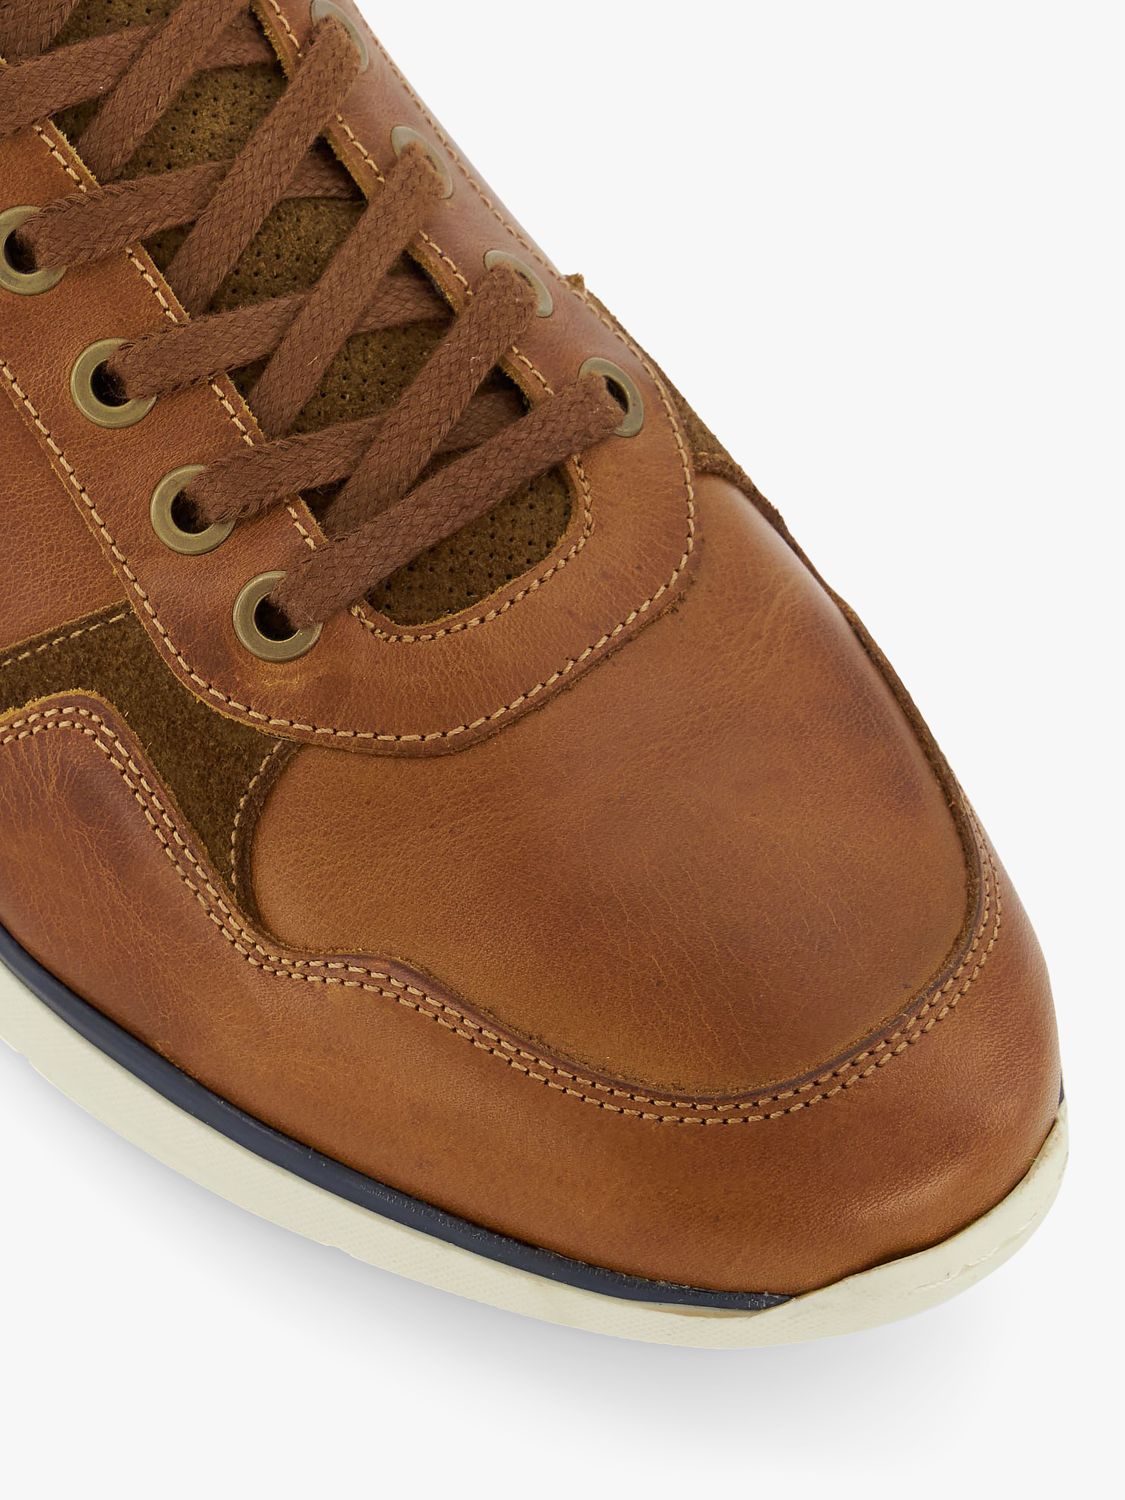 Buy Dune Trended Wide Fit Leather Lace Up Trainers, Tan Online at johnlewis.com